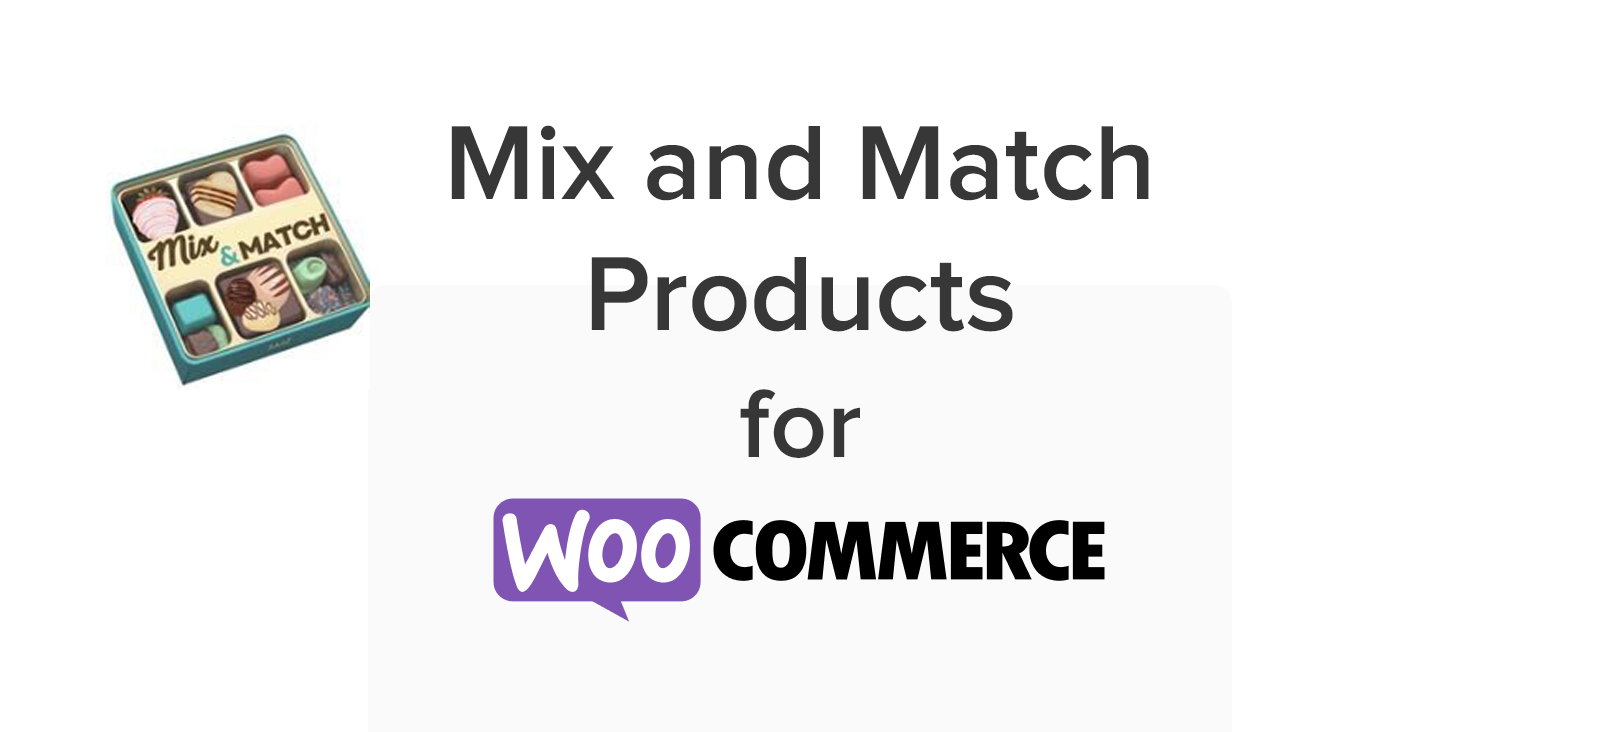 WooCommerce Mix and Match Products is perfect for encouraging customers to buy in bulk without forcing them to buy items that don't interest them.